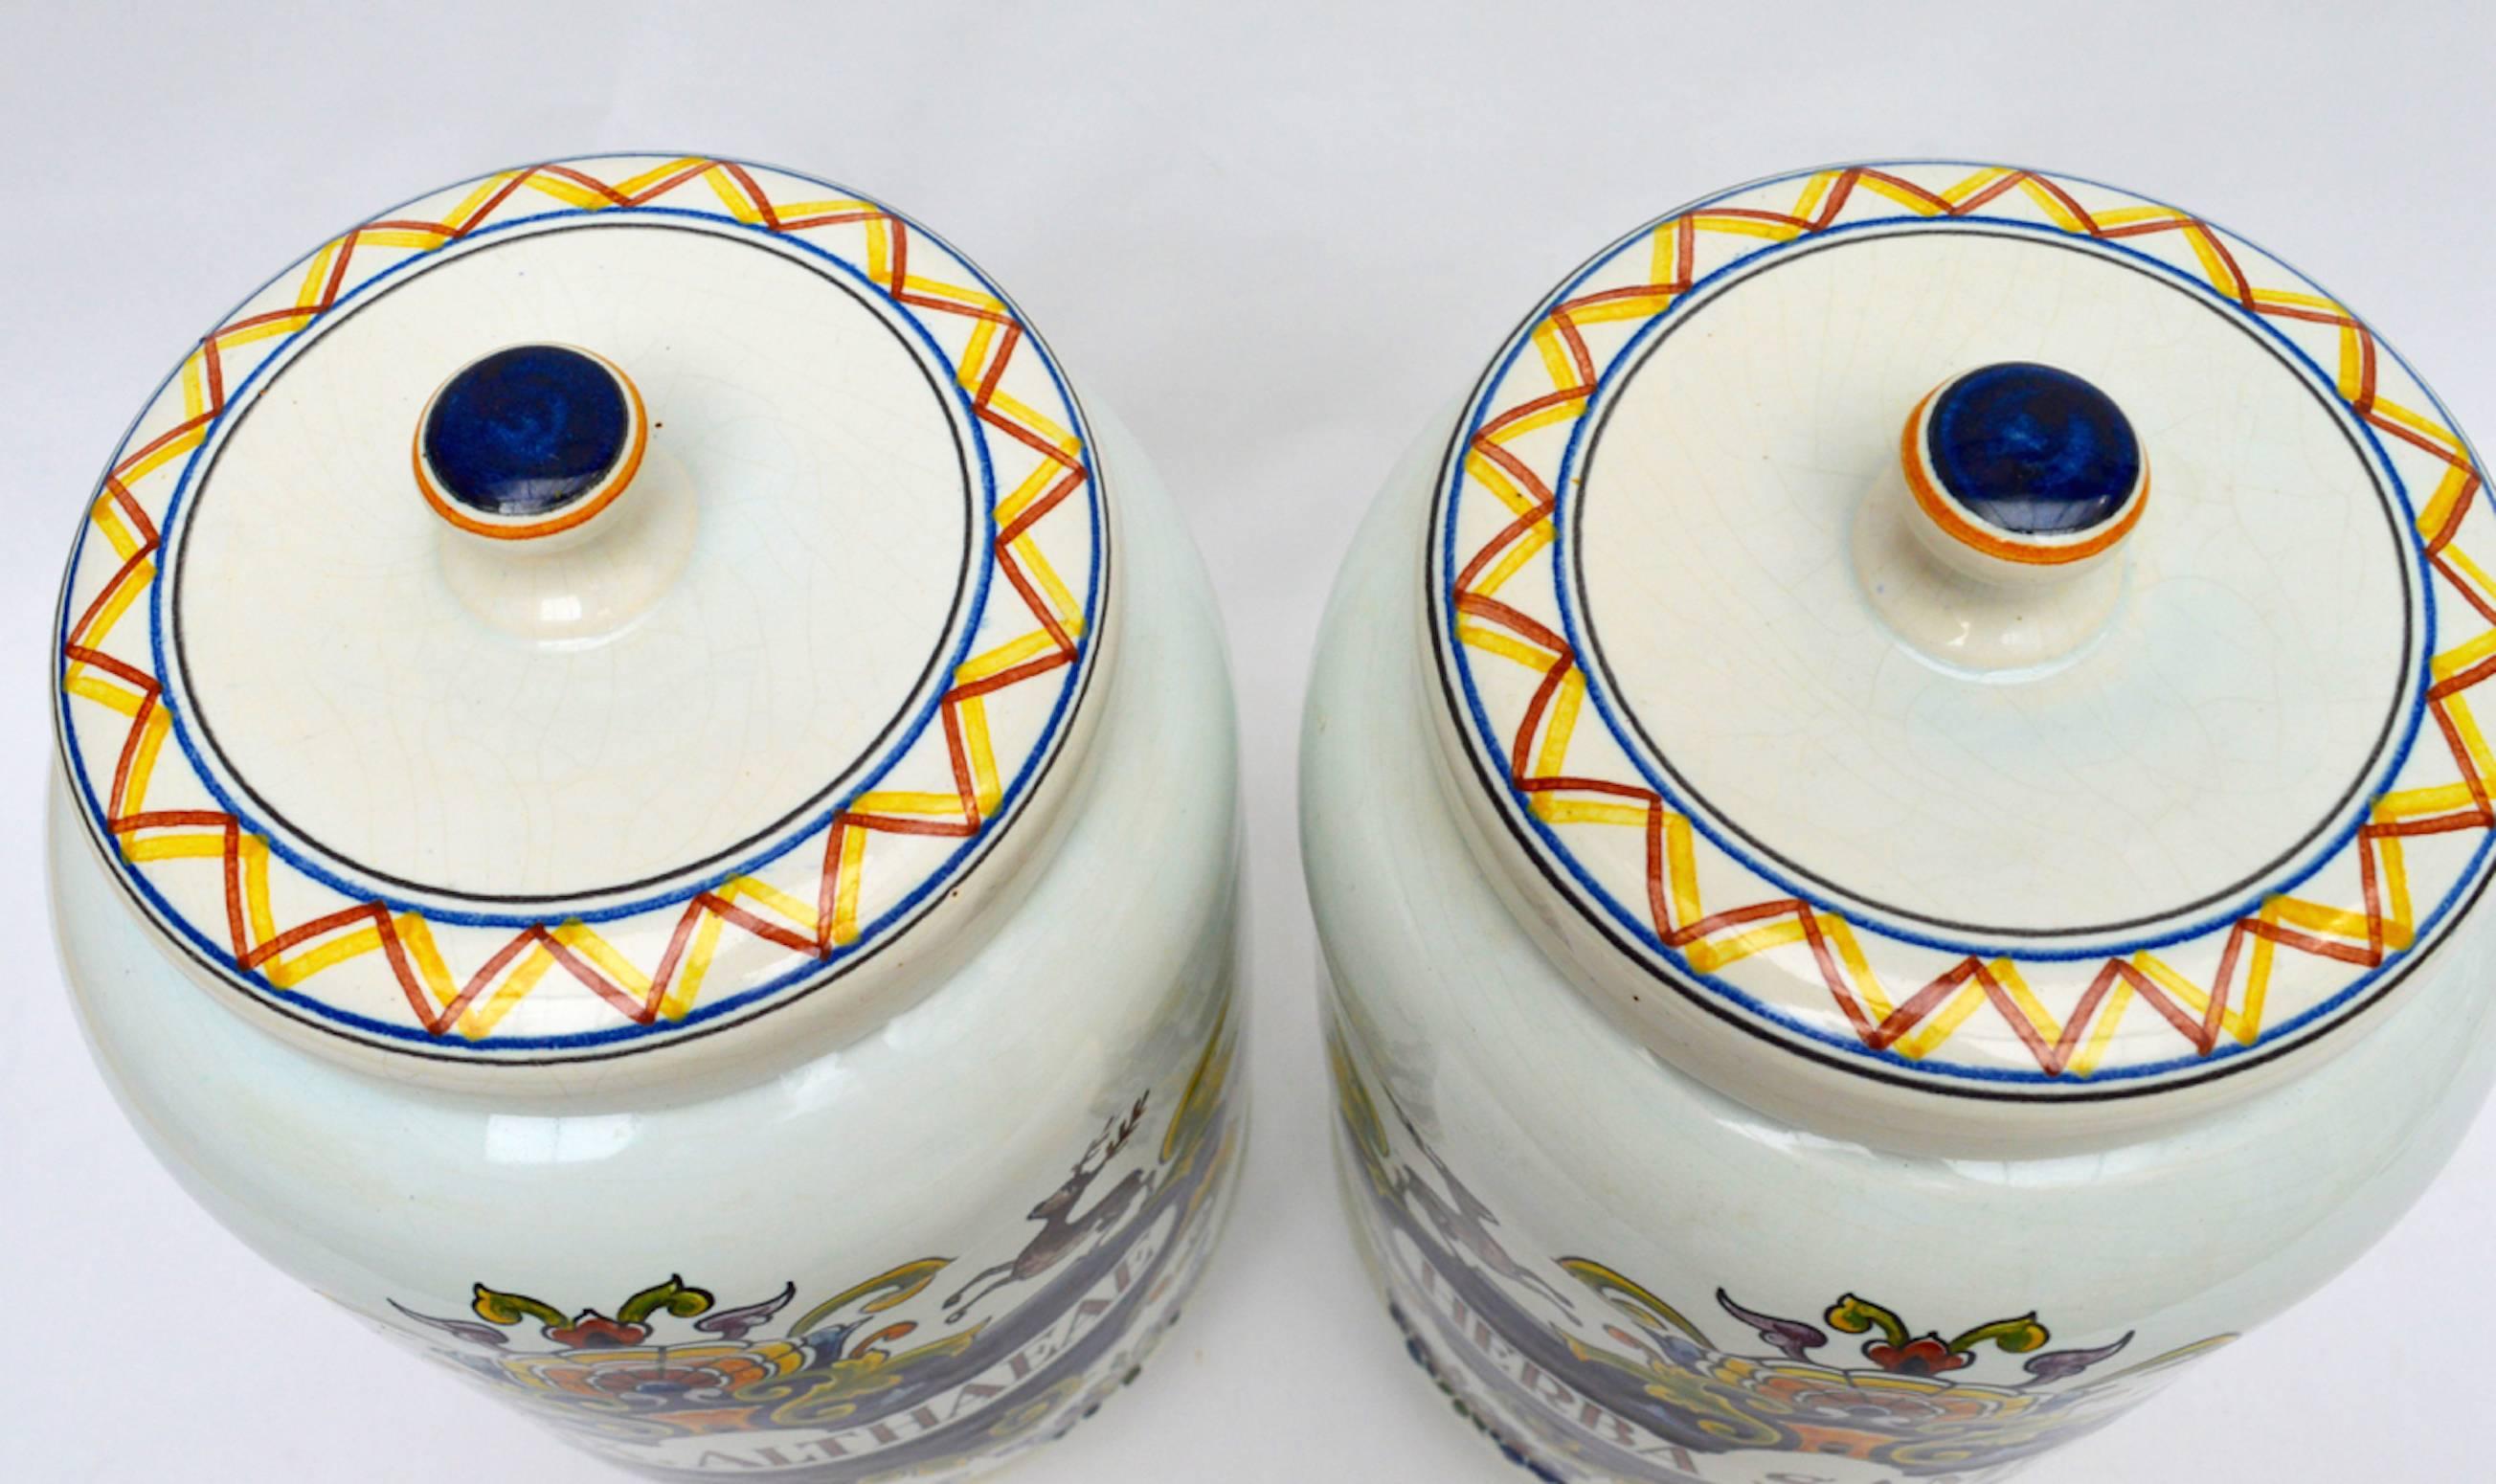 A pair of faience glazed ceramic apothecary jars made by Oud Delft in Nijmegen, Holland. In excellent condition.